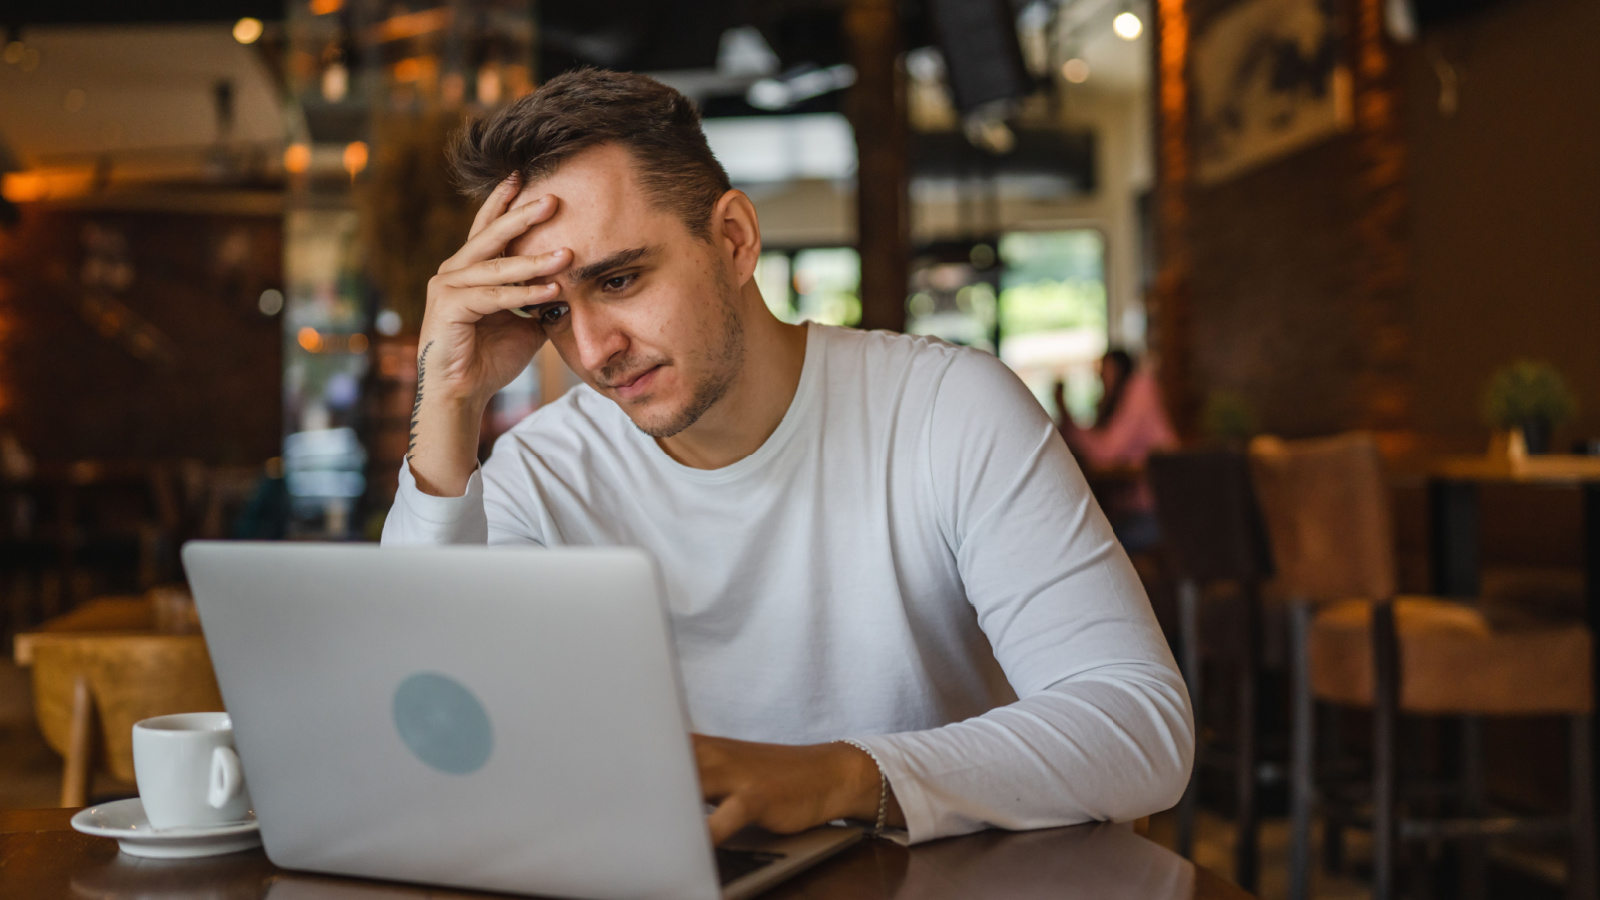 image credit: Miljan Zivkovic/Shutterstock <p><span>Procrastinating on policy renewals can lead to lapses in coverage. This gap can be financially devastating if you require medical care during this period. Timely renewals ensure continuous coverage and peace of mind.</span></p>